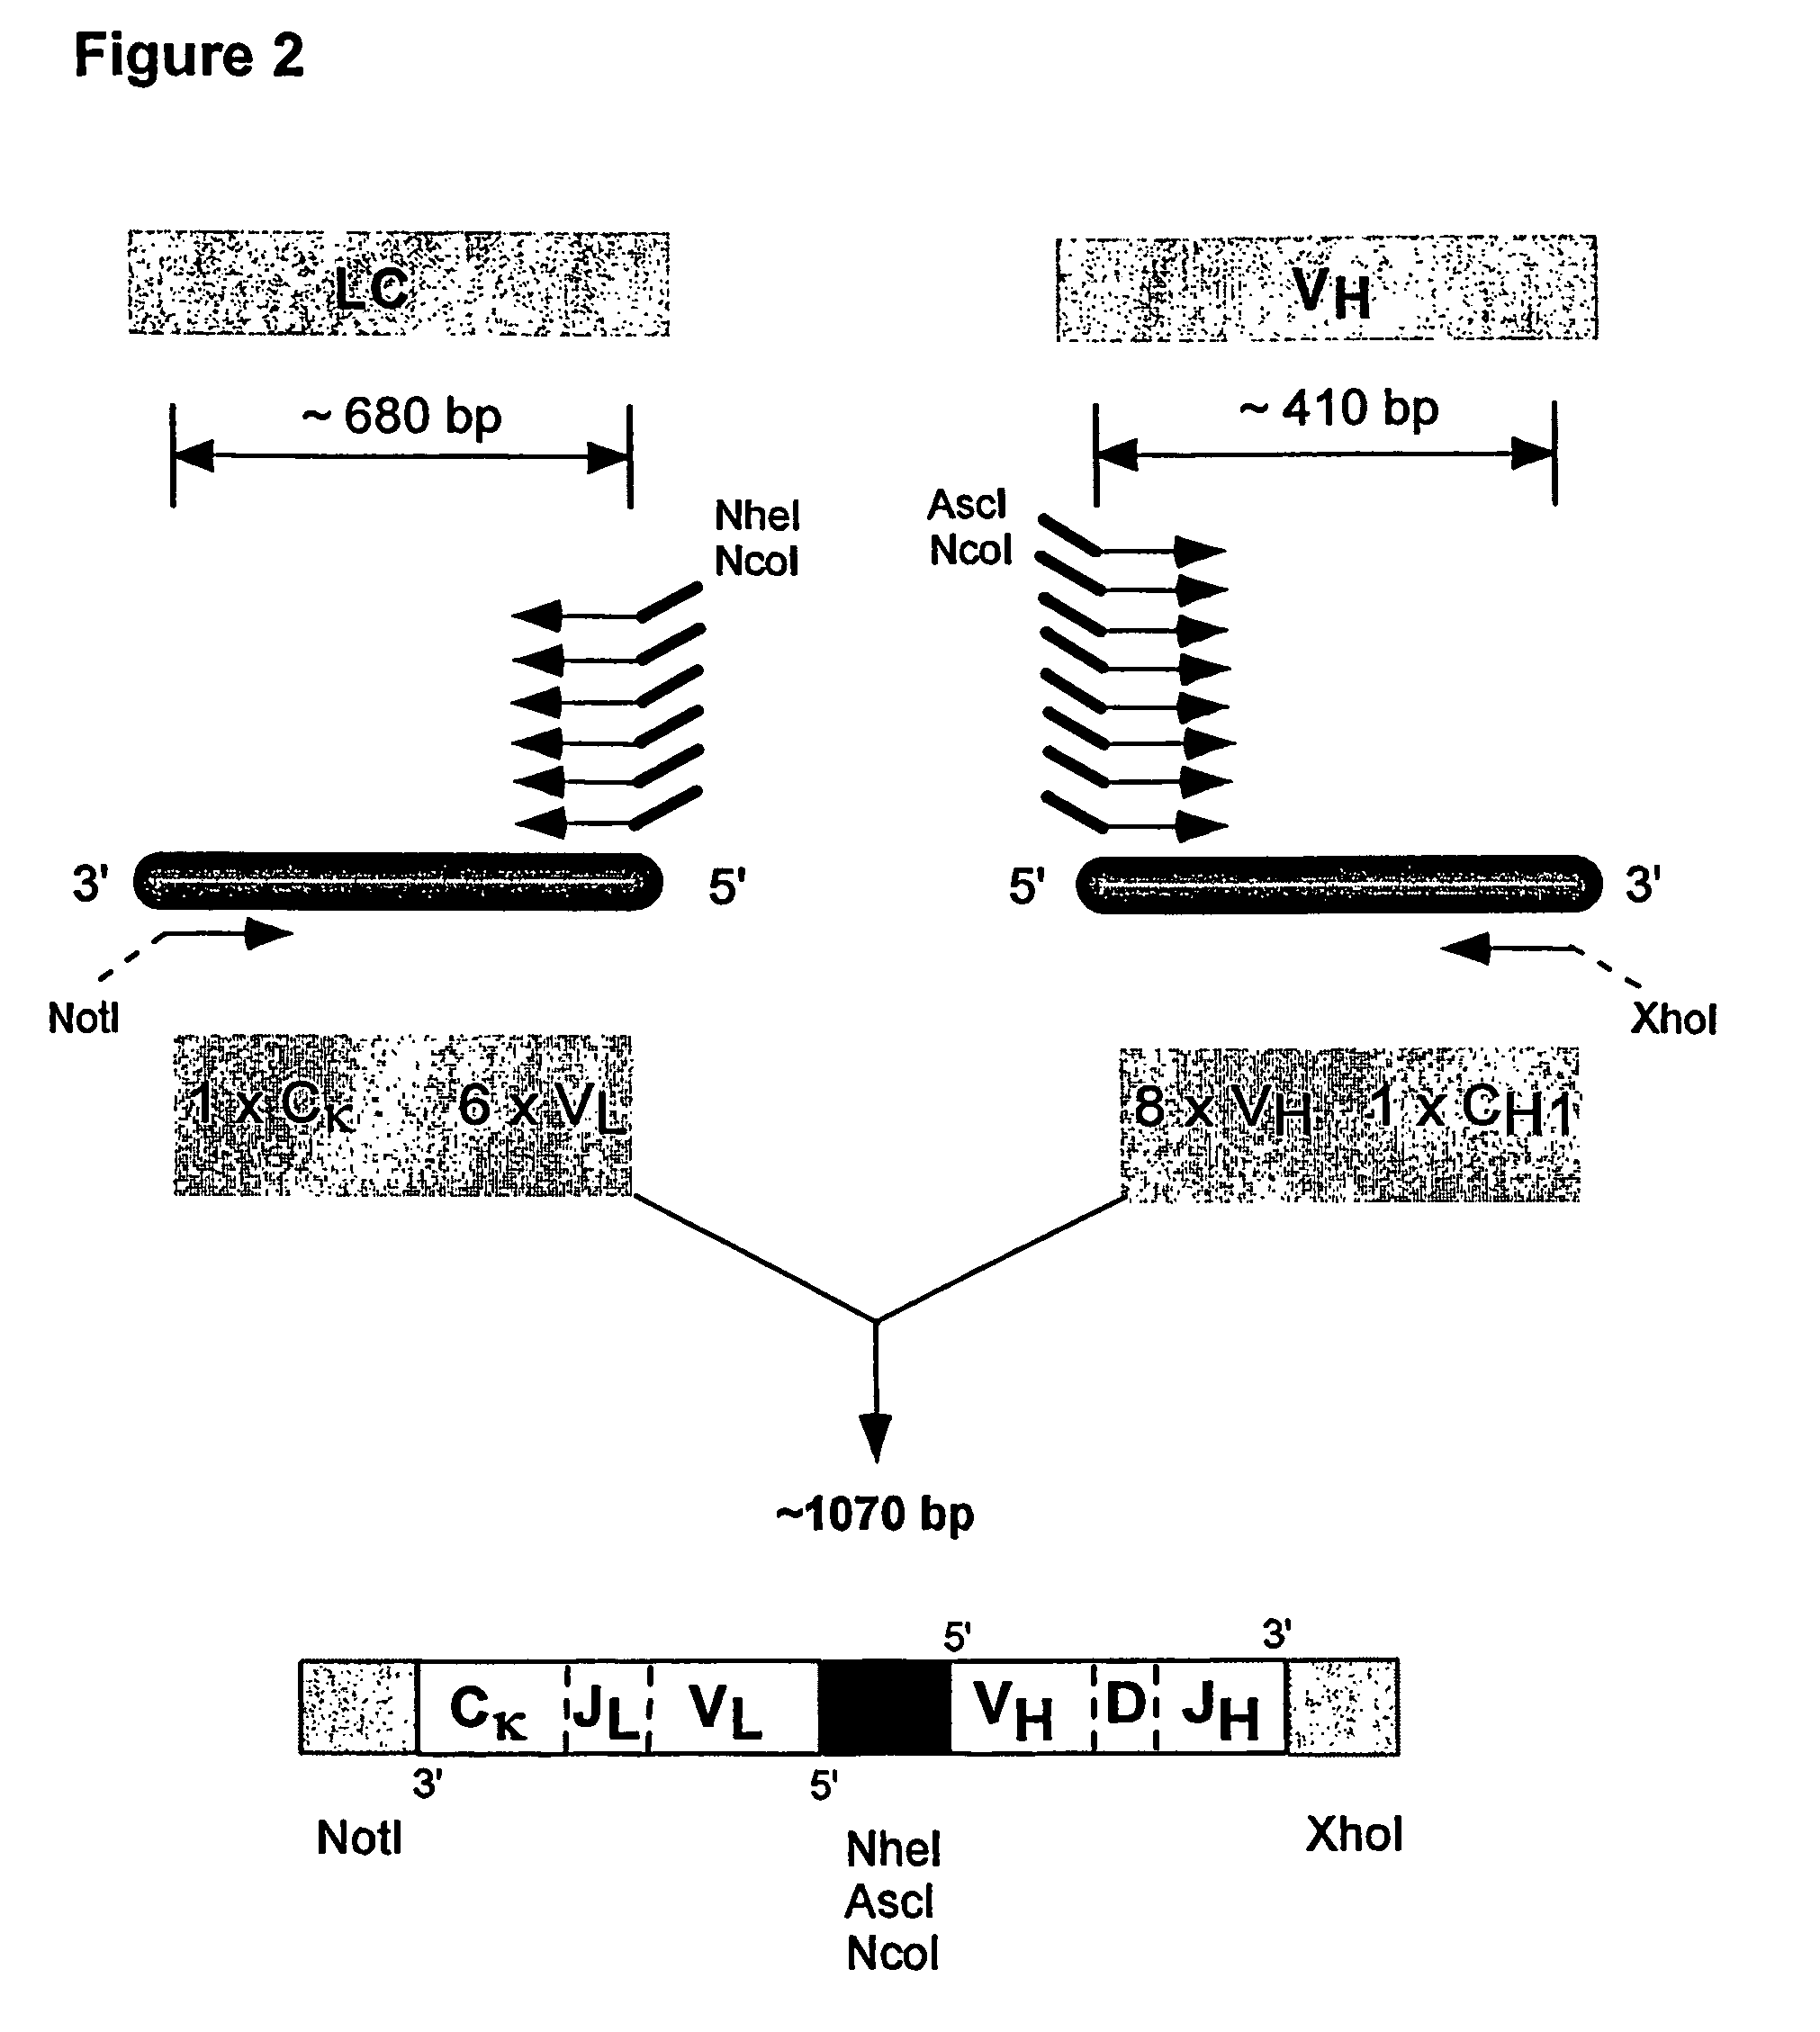 Method for linking sequences of interest